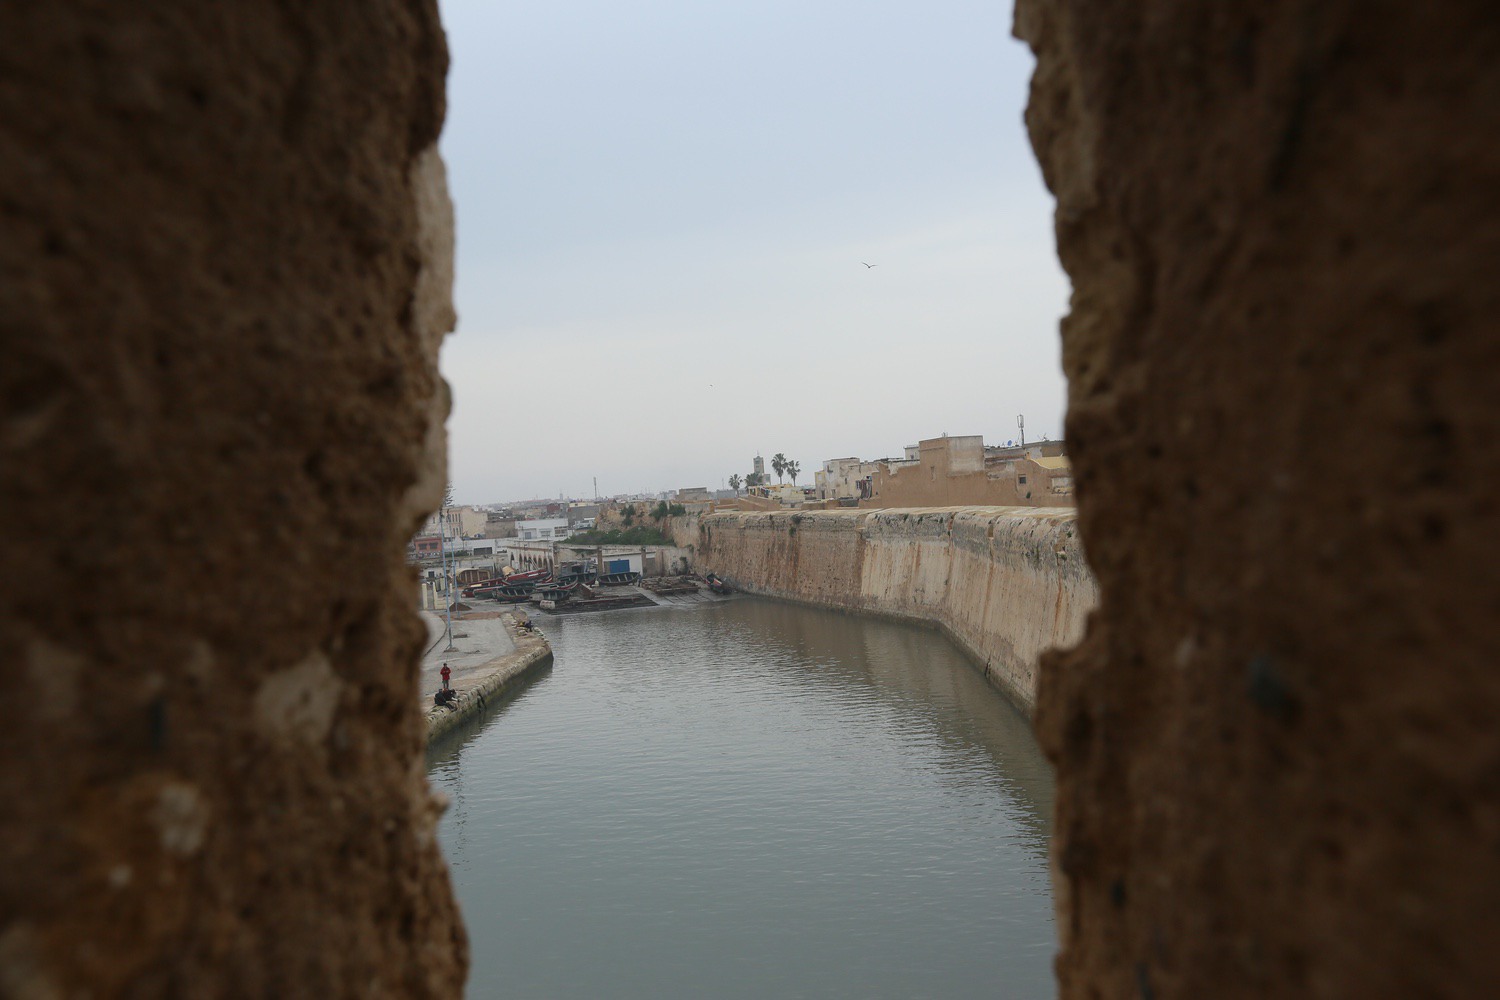 View toward the port from an opening in the fortified wall